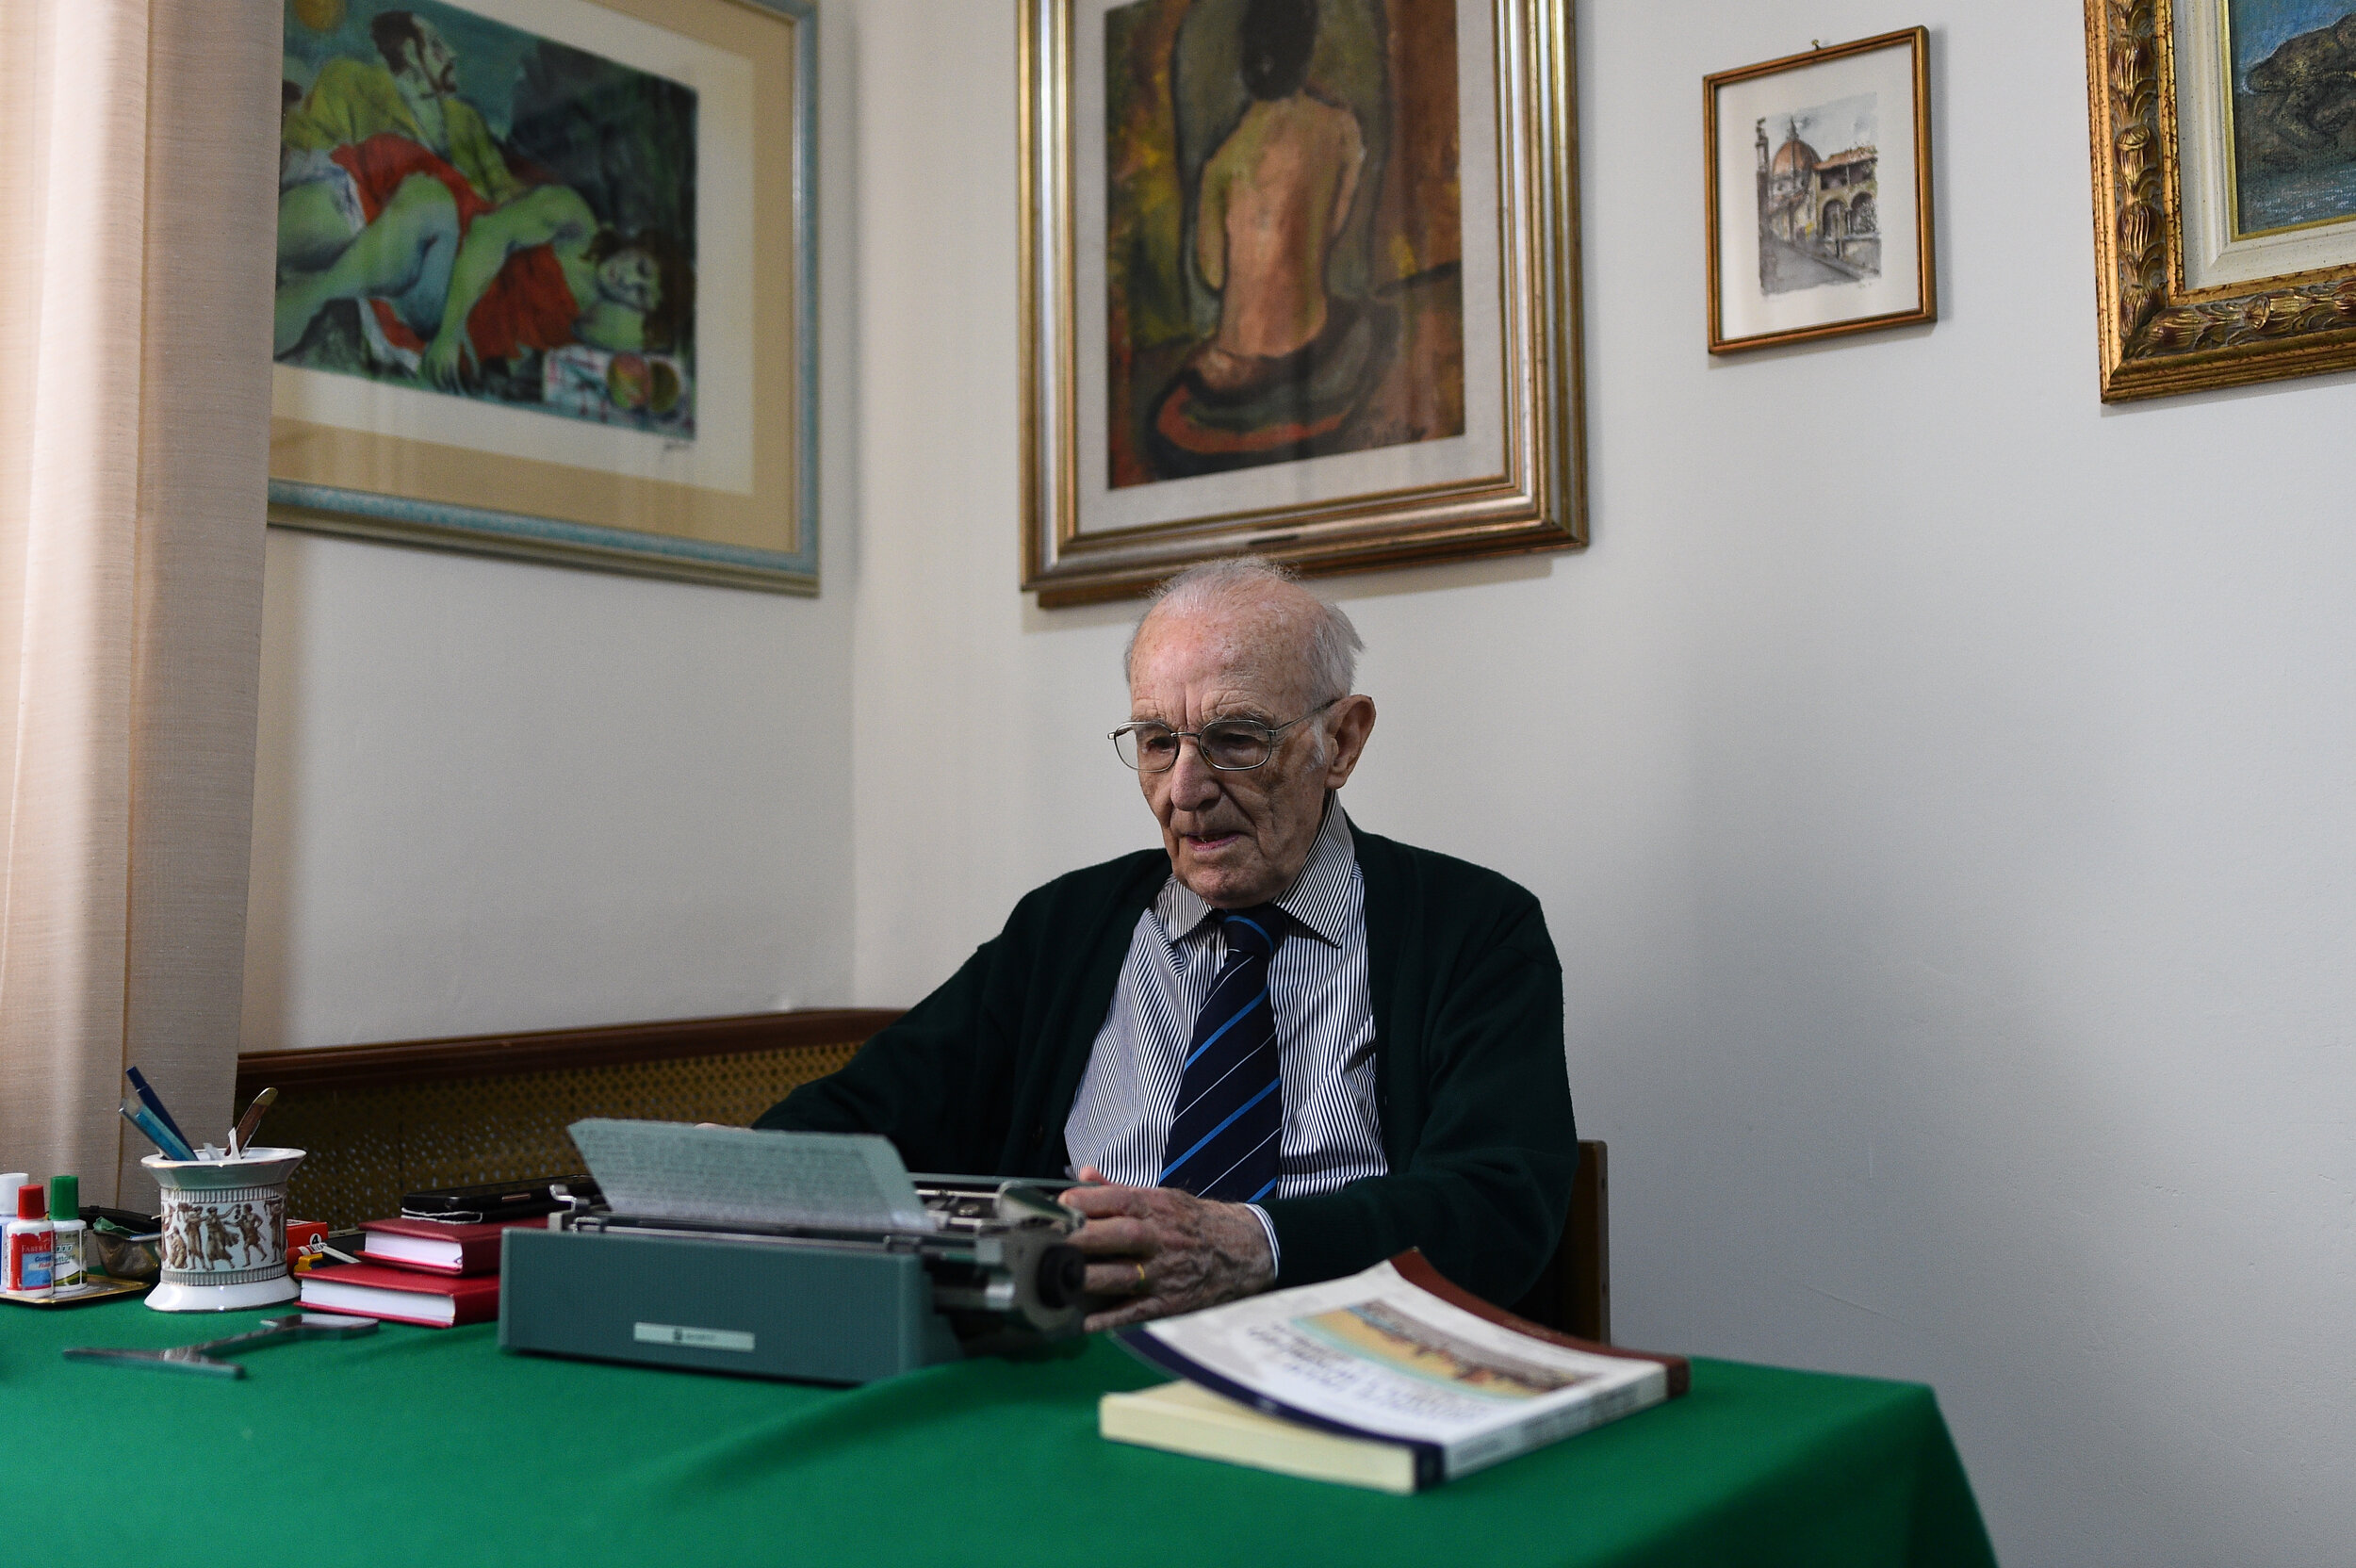  Giuseppe Paterno, 96, Italy's oldest student, who is studying for an undergraduate degree in history and philosophy at The University of Palermo, uses his typewriter as he studies for an exam, at his home in Palermo, Italy, November 4, 2019. 